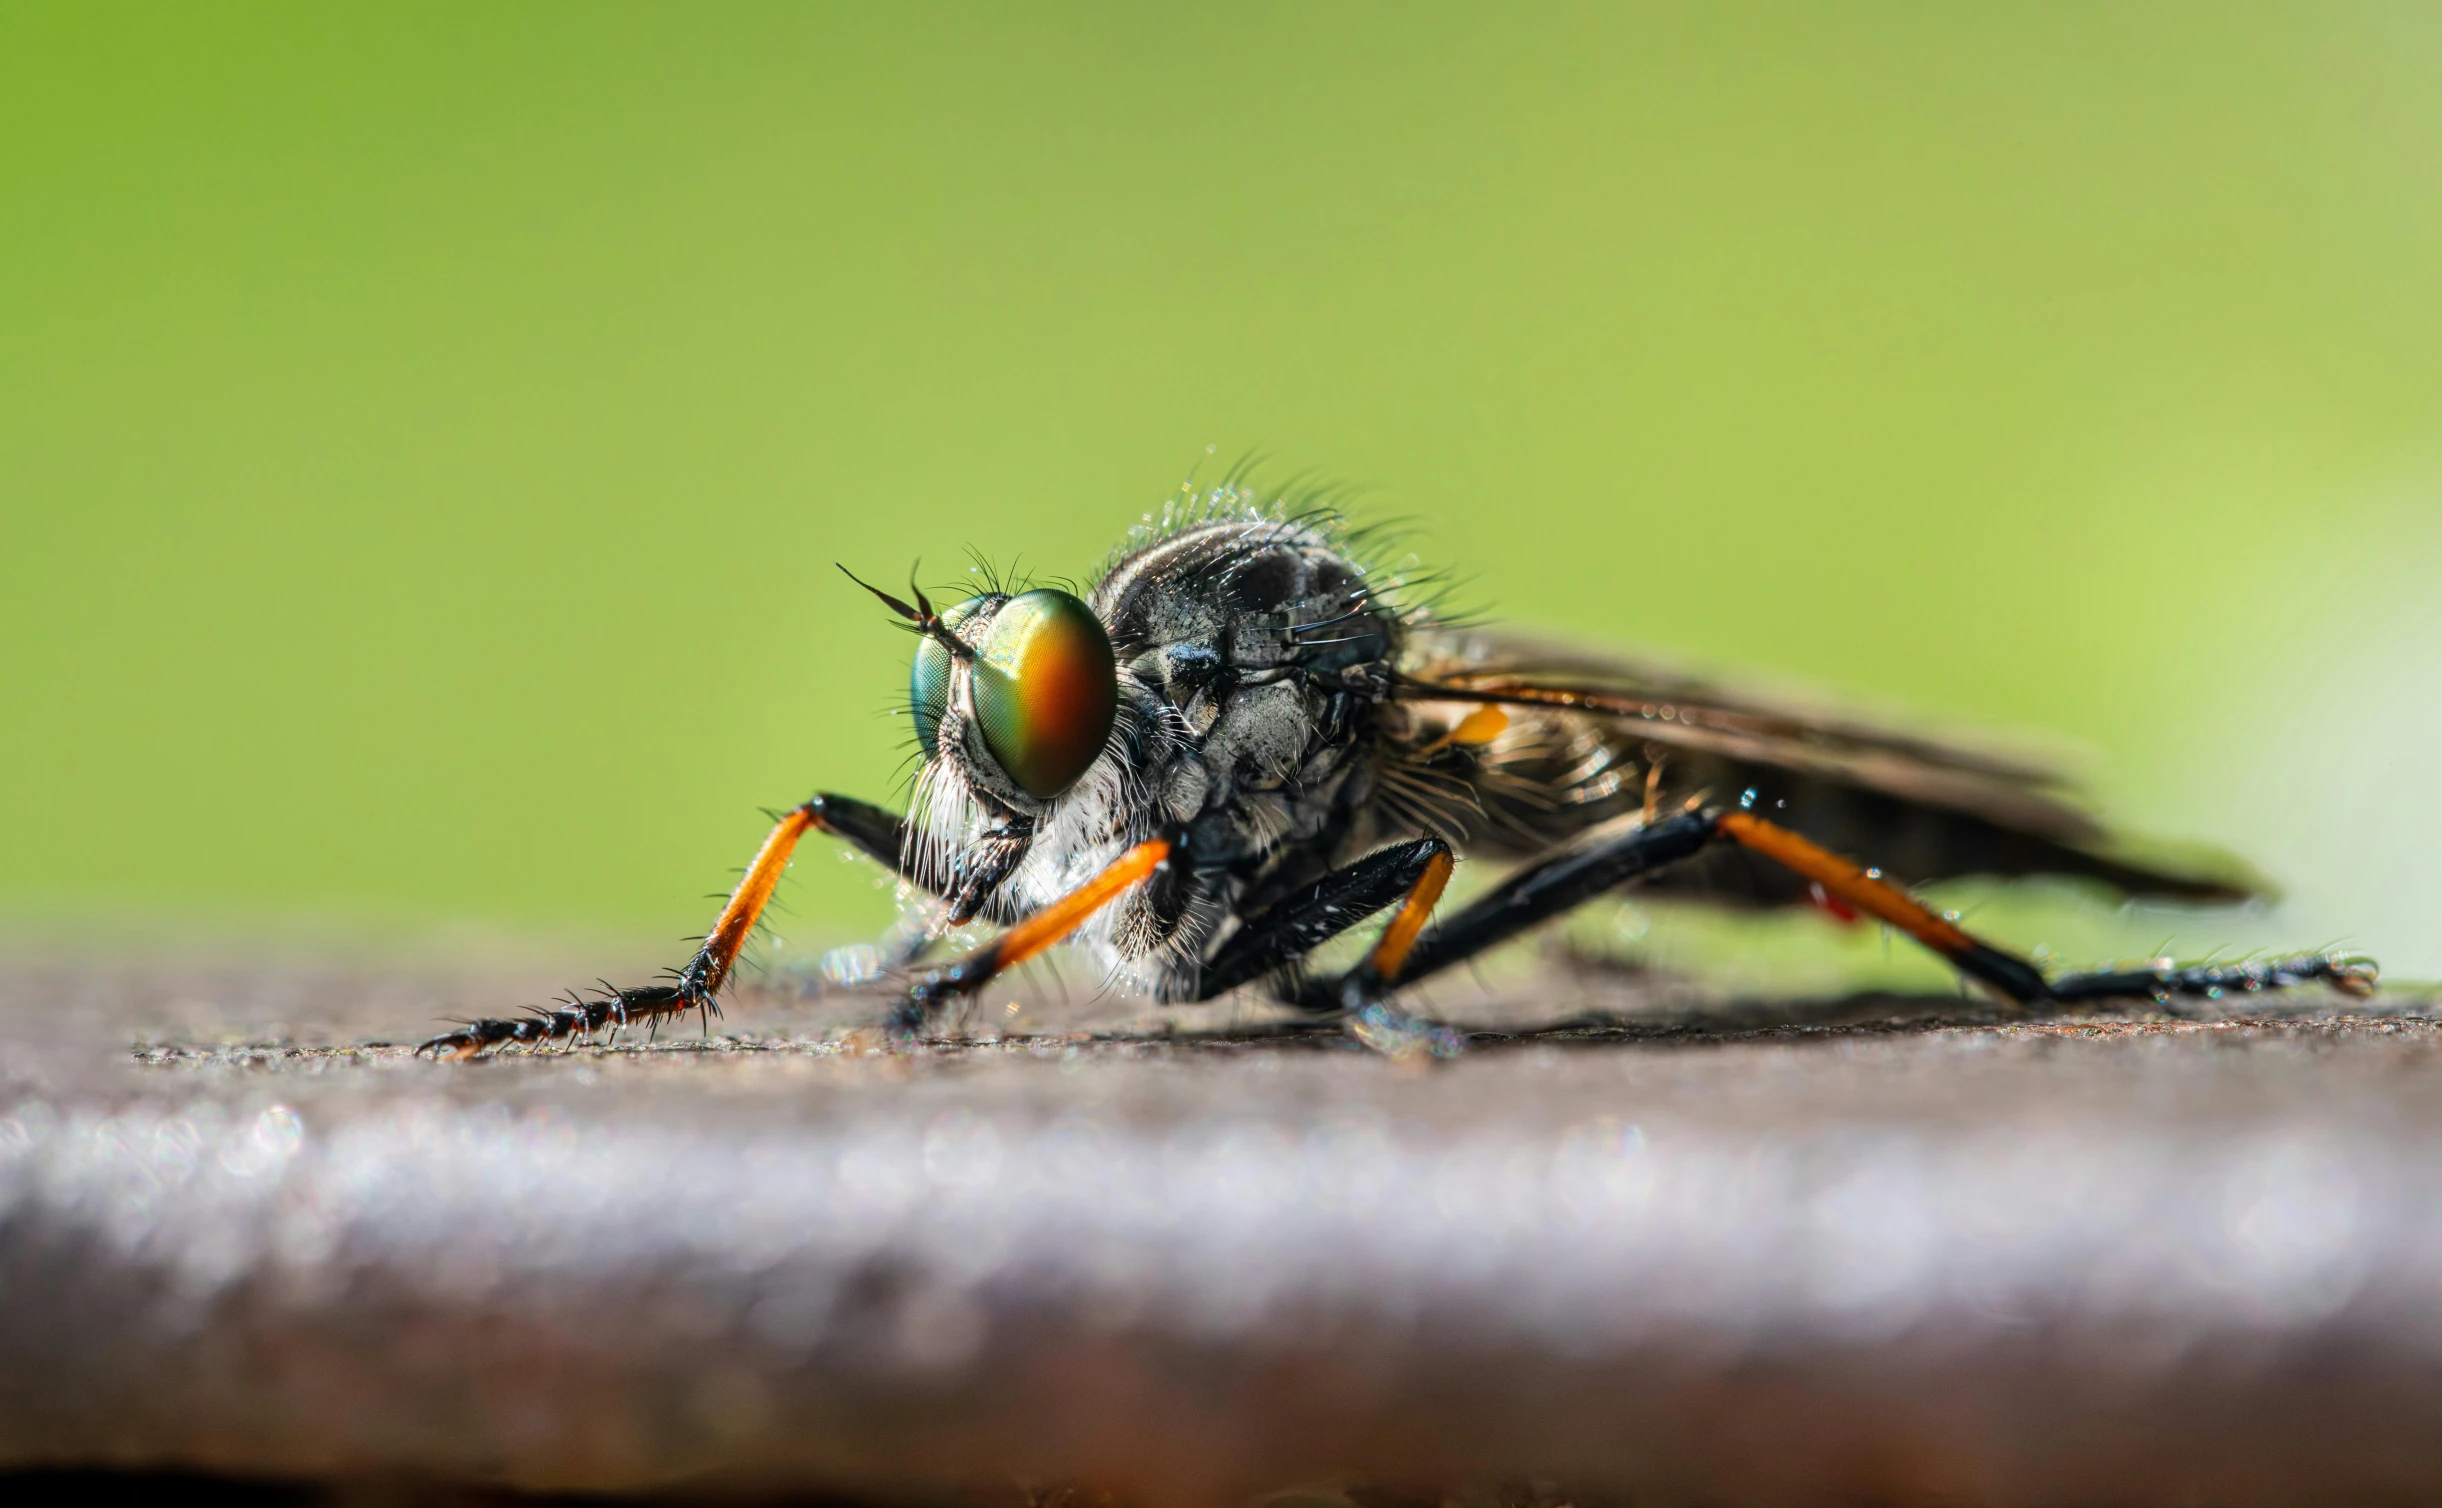 a fly sitting on top of a wooden surface